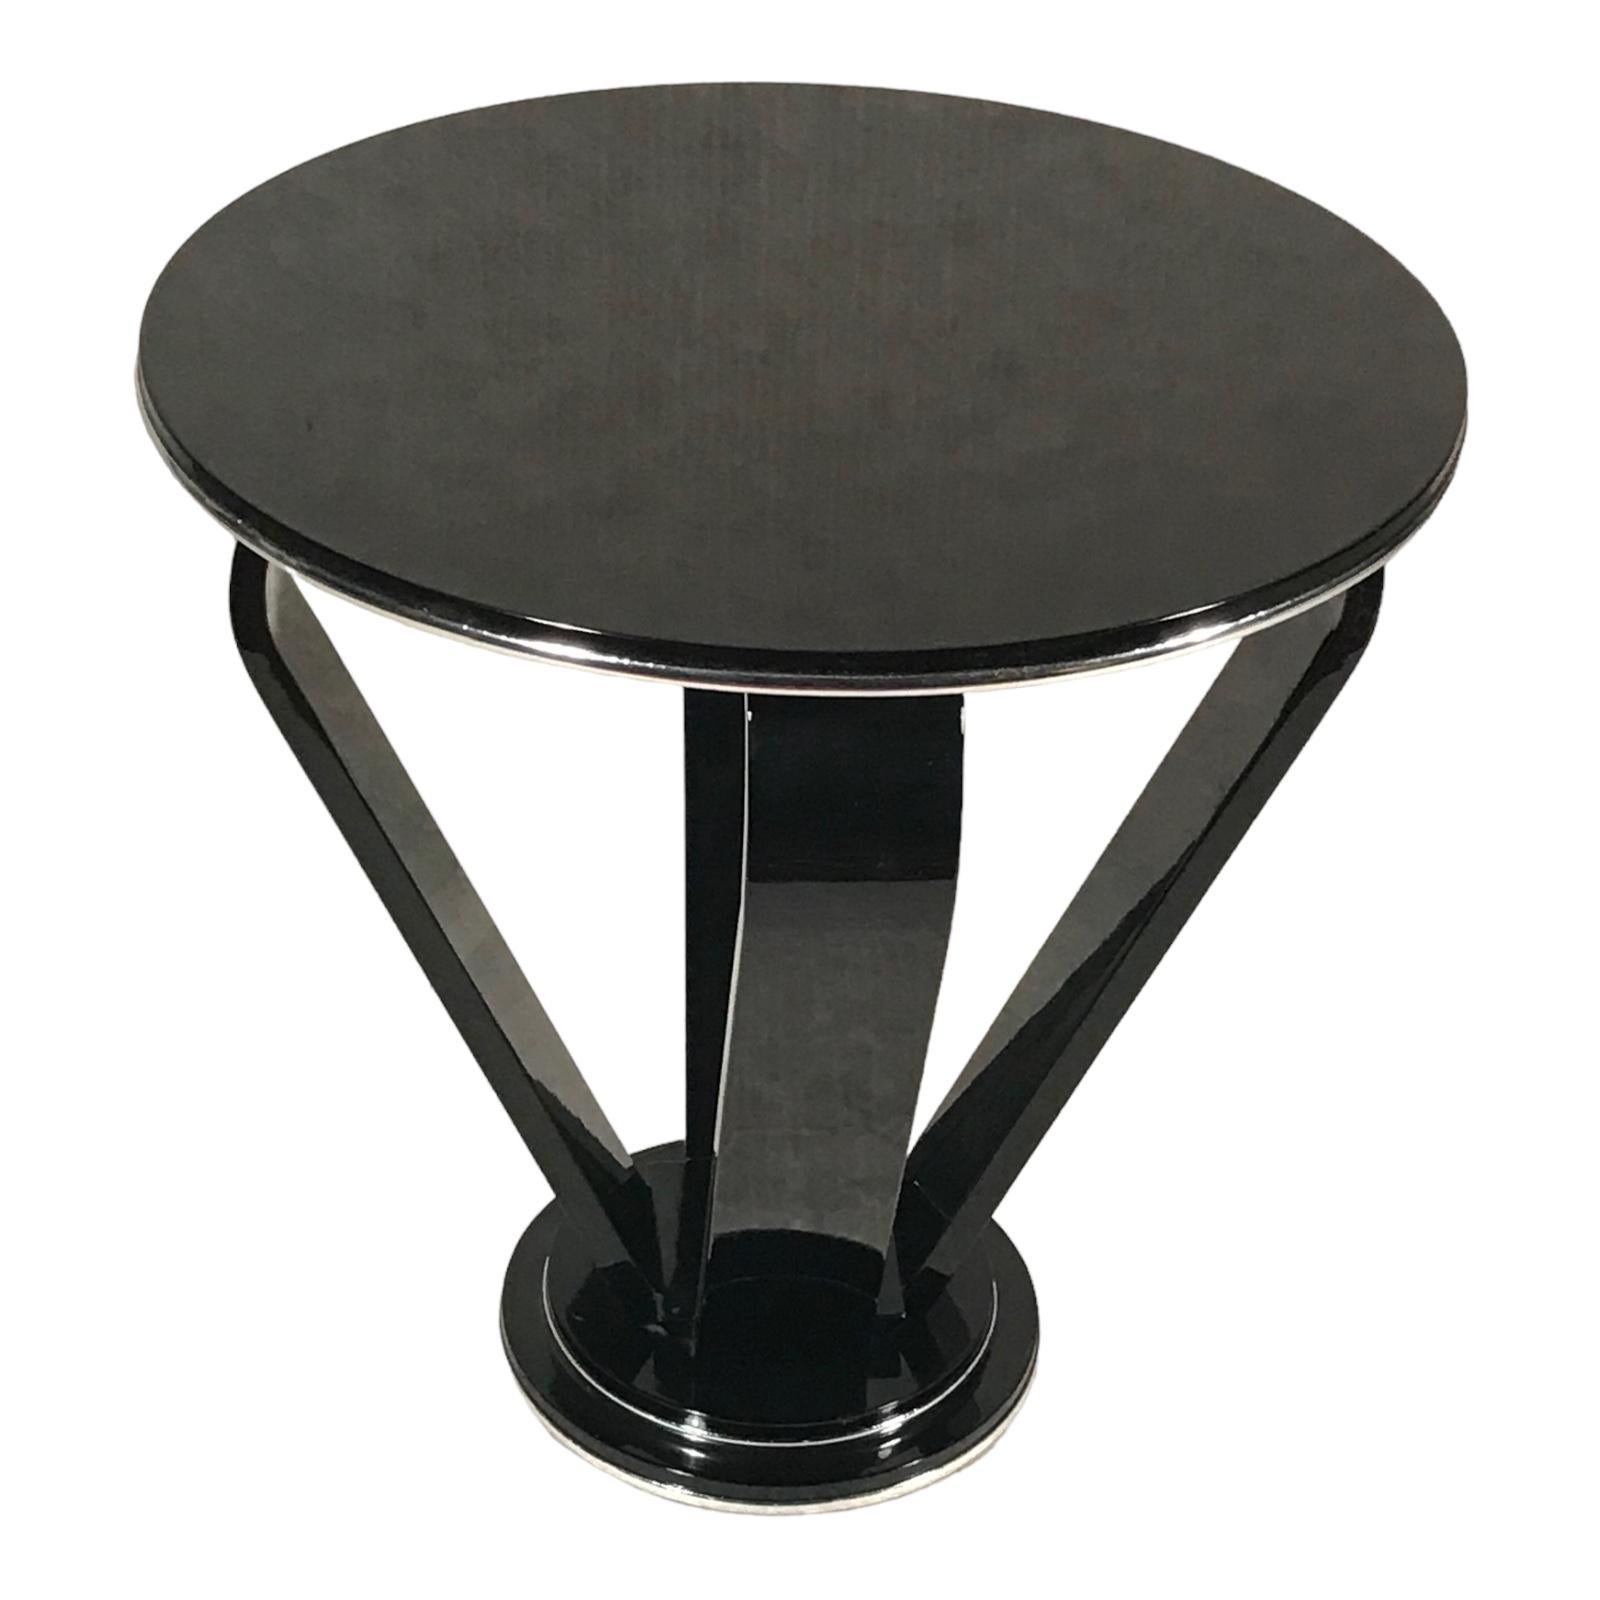 Introducing a remarkable round Art Deco table from France, crafted between the 1920s and 1930s. This exquisite piece showcases the timeless beauty of the Art Deco era, making it a captivating addition to any interior space.

Resting on four